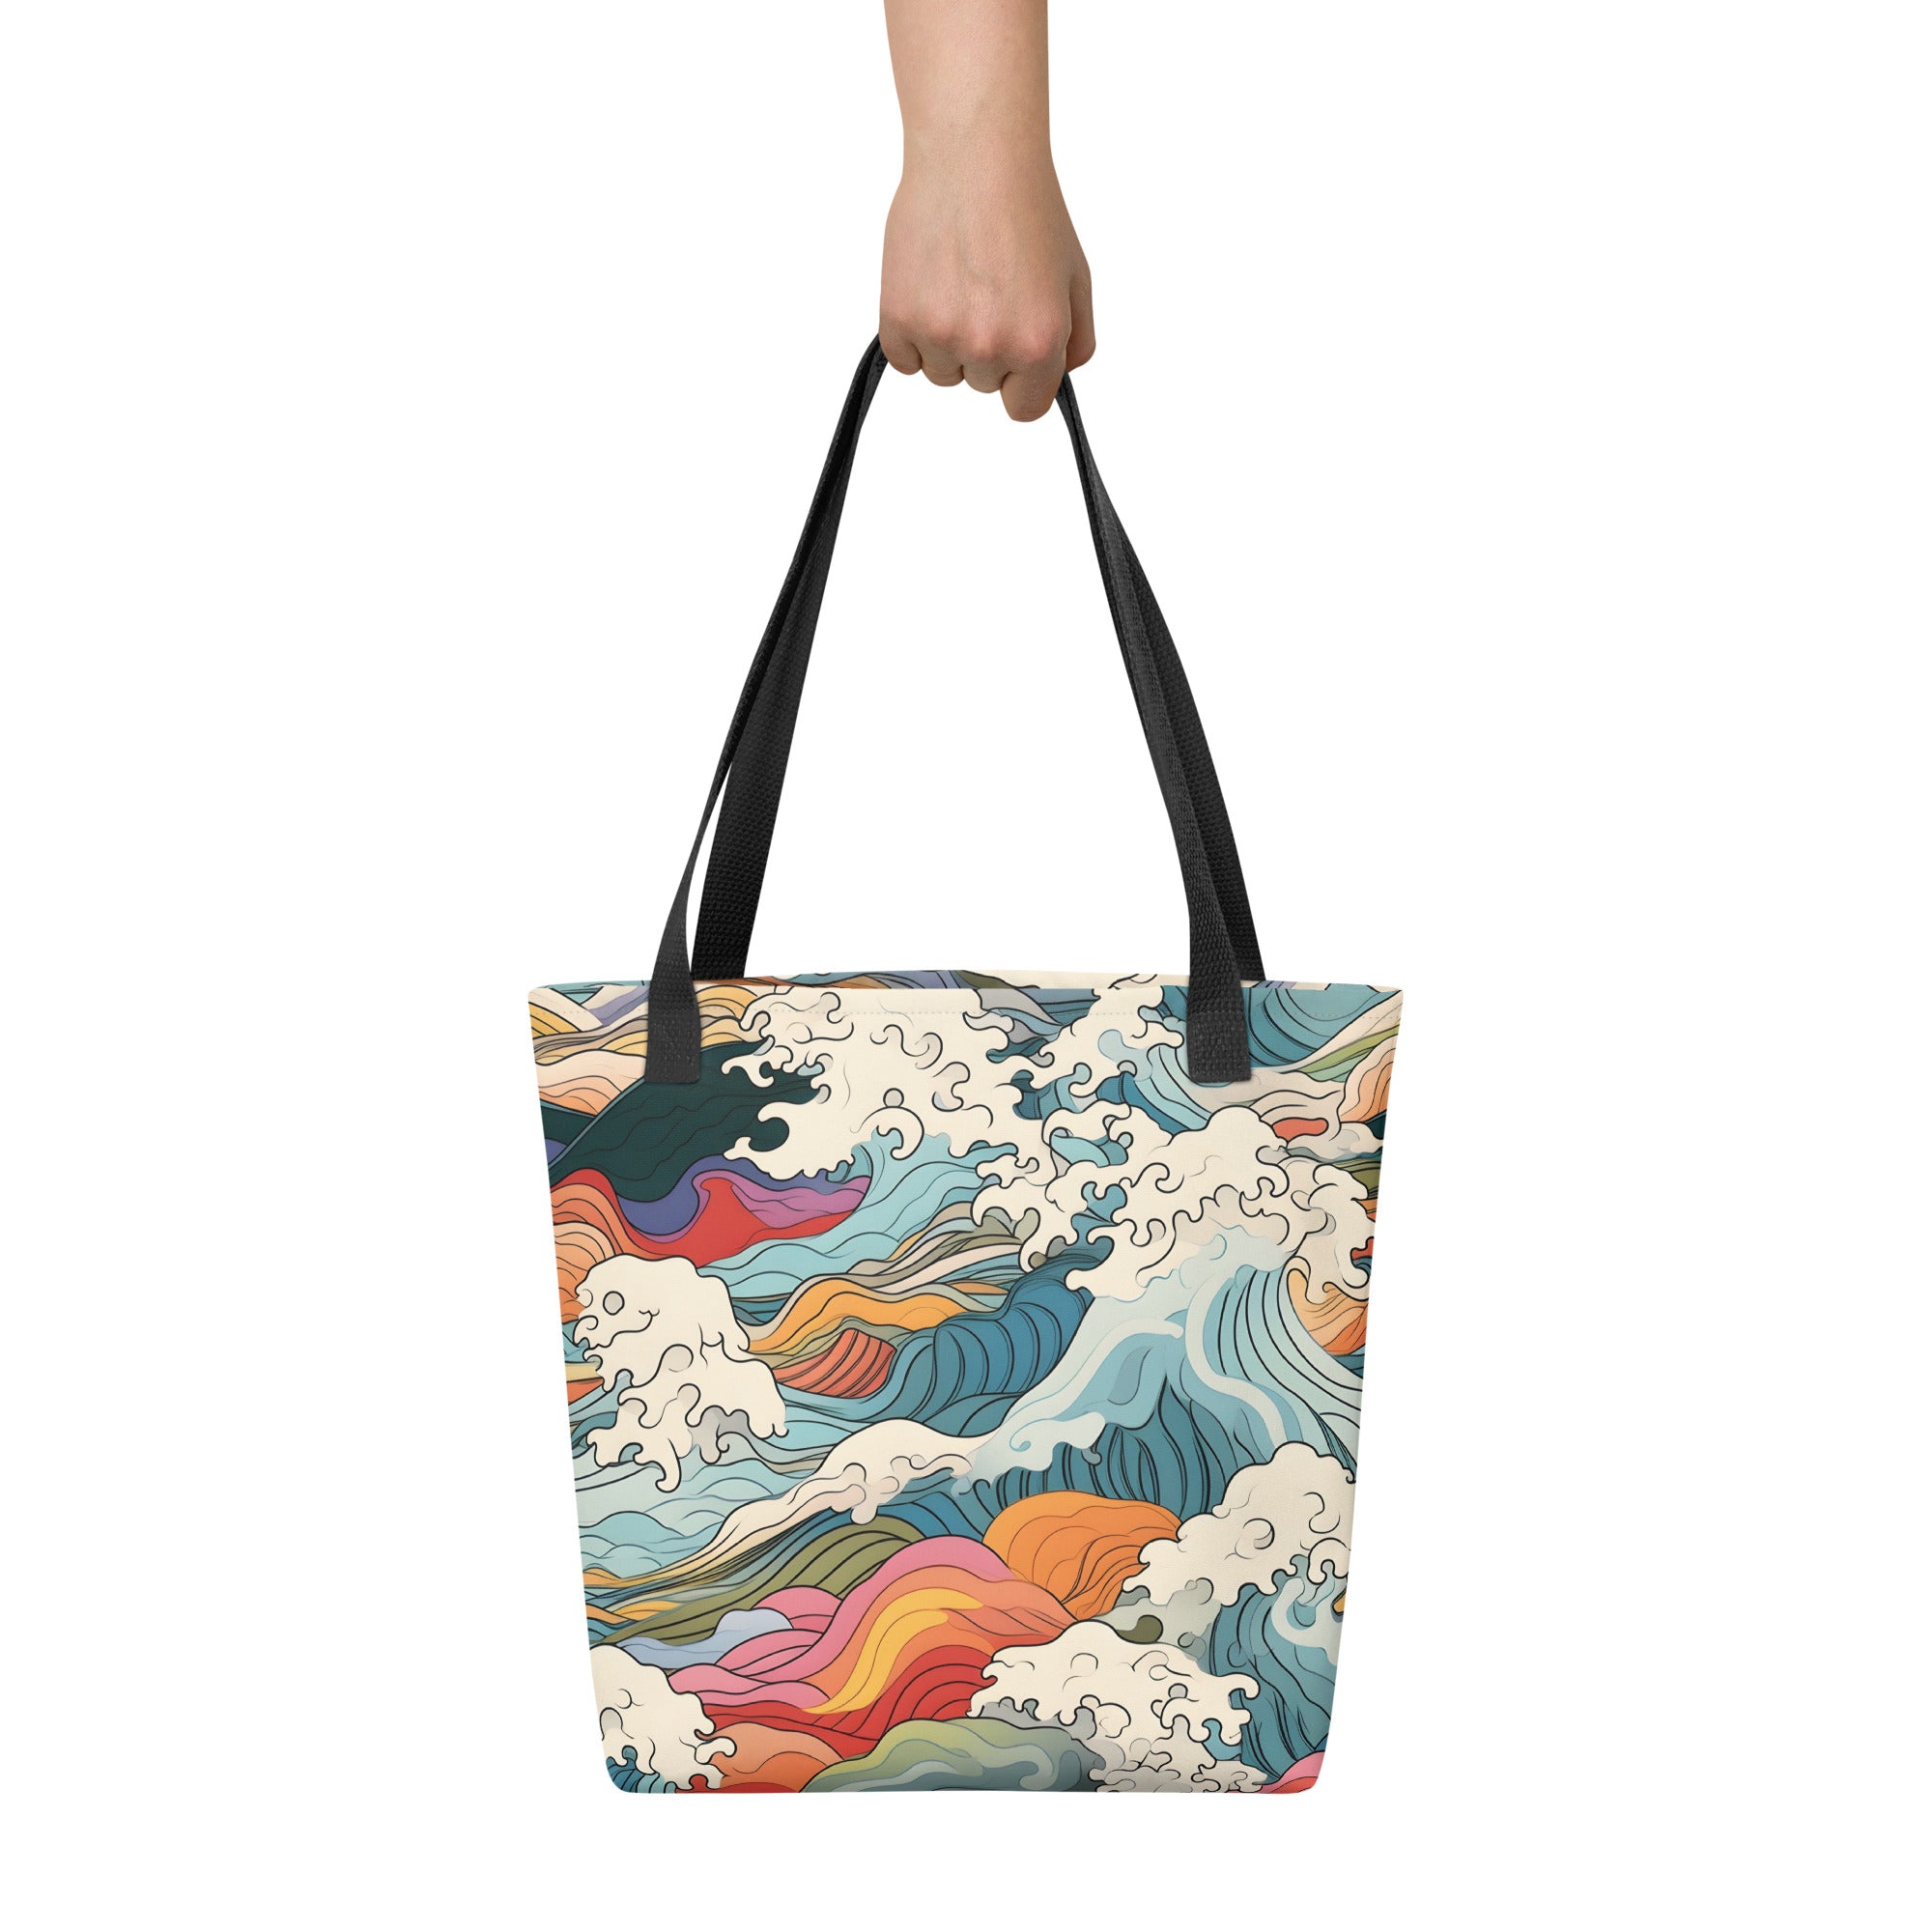 all-over-print-tote-black-15x15-front-65a9c76c48a4d.jpg